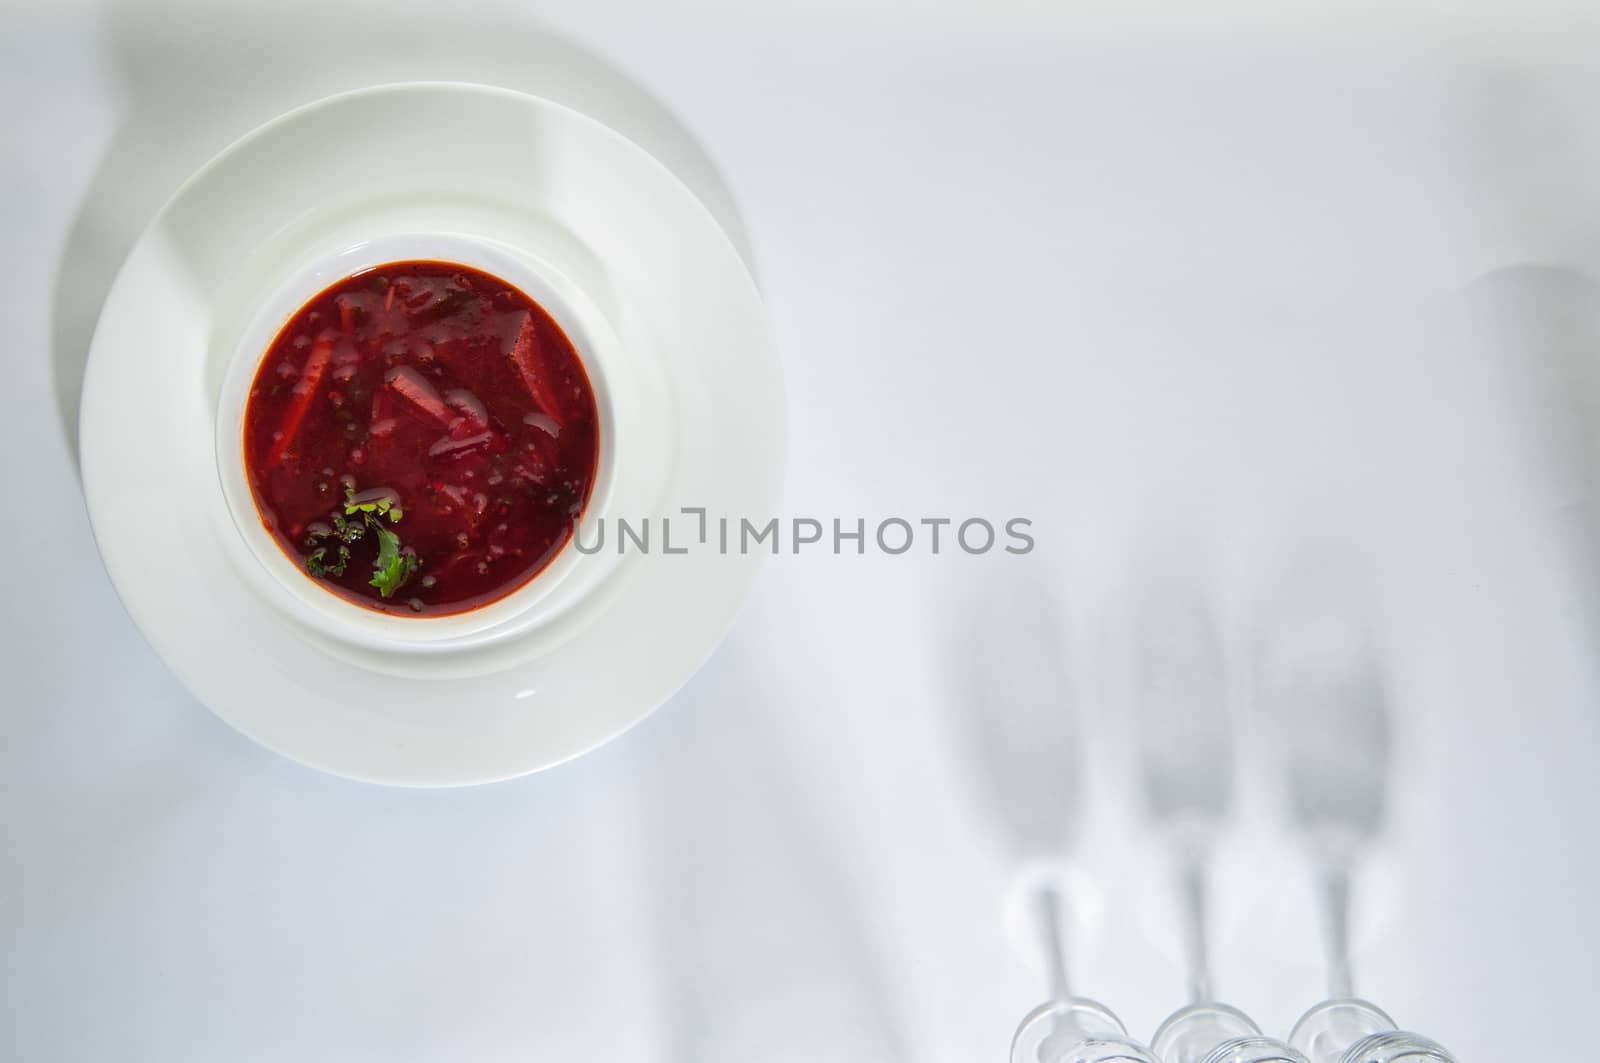 soup in a plate on a white surface with a shadow from the wine glasses